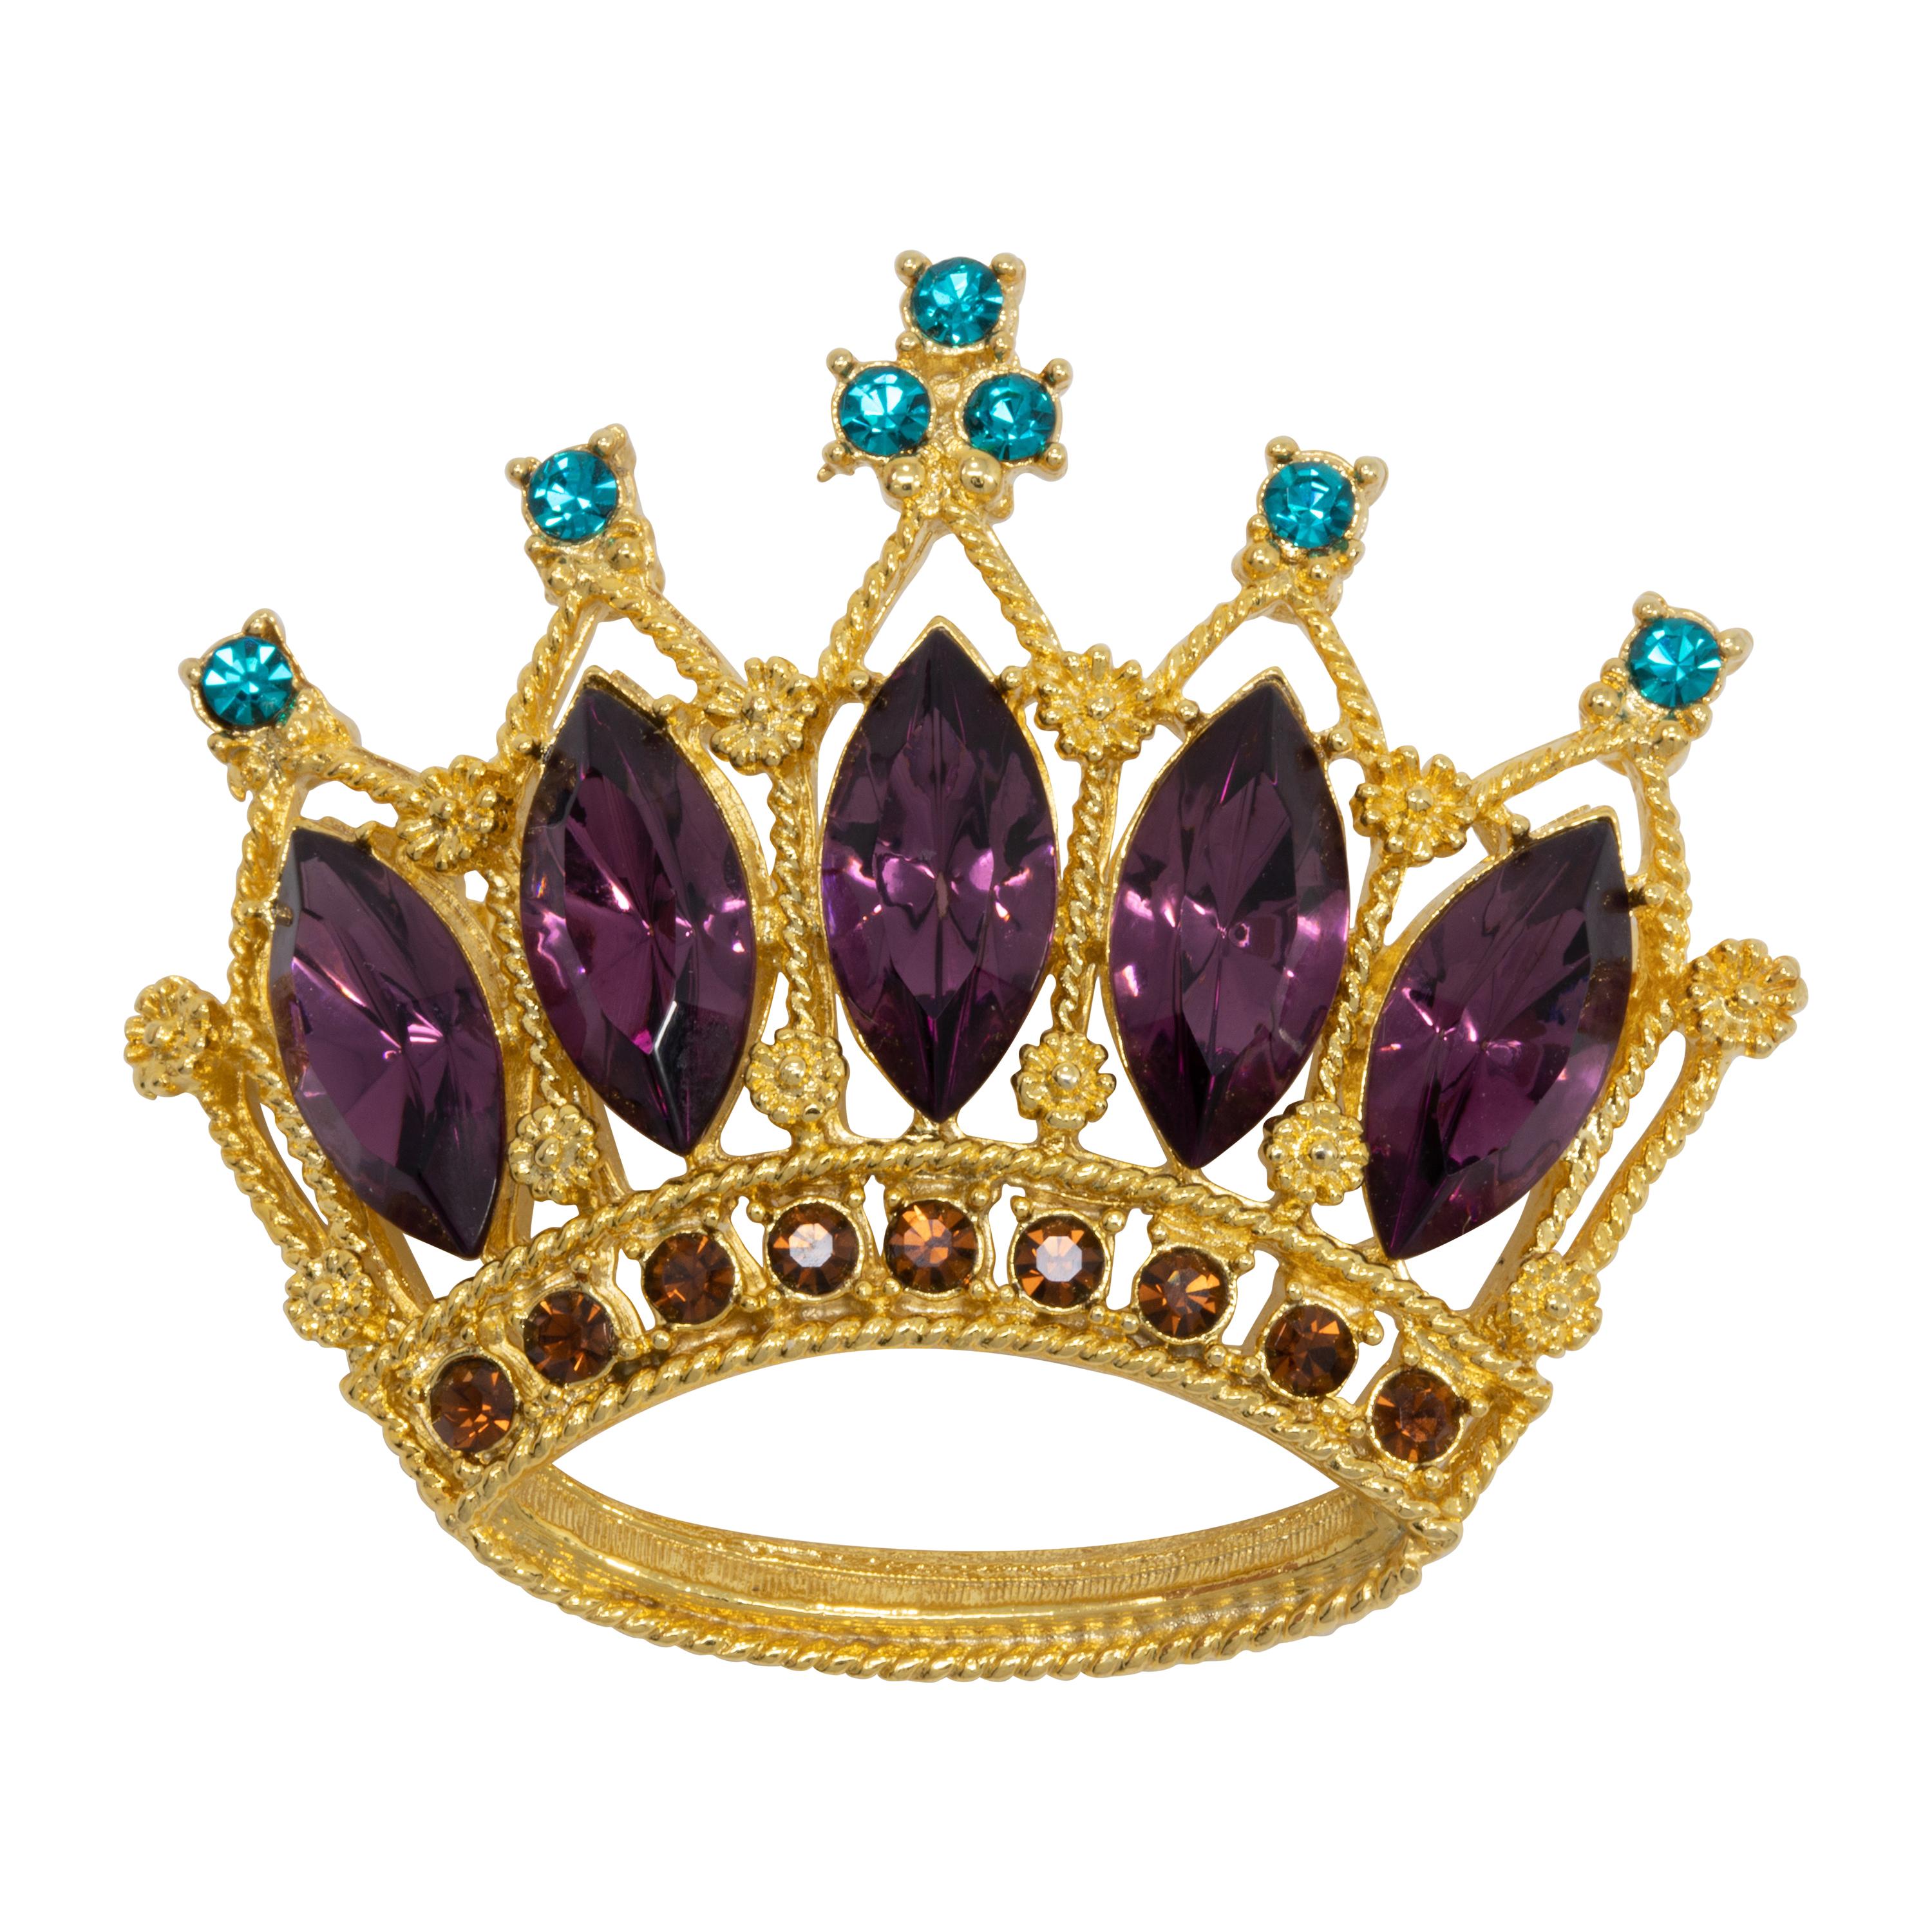 Vintage Gold Jeweled Crown Pin Brooch, Amethyst and Emerald Crystals